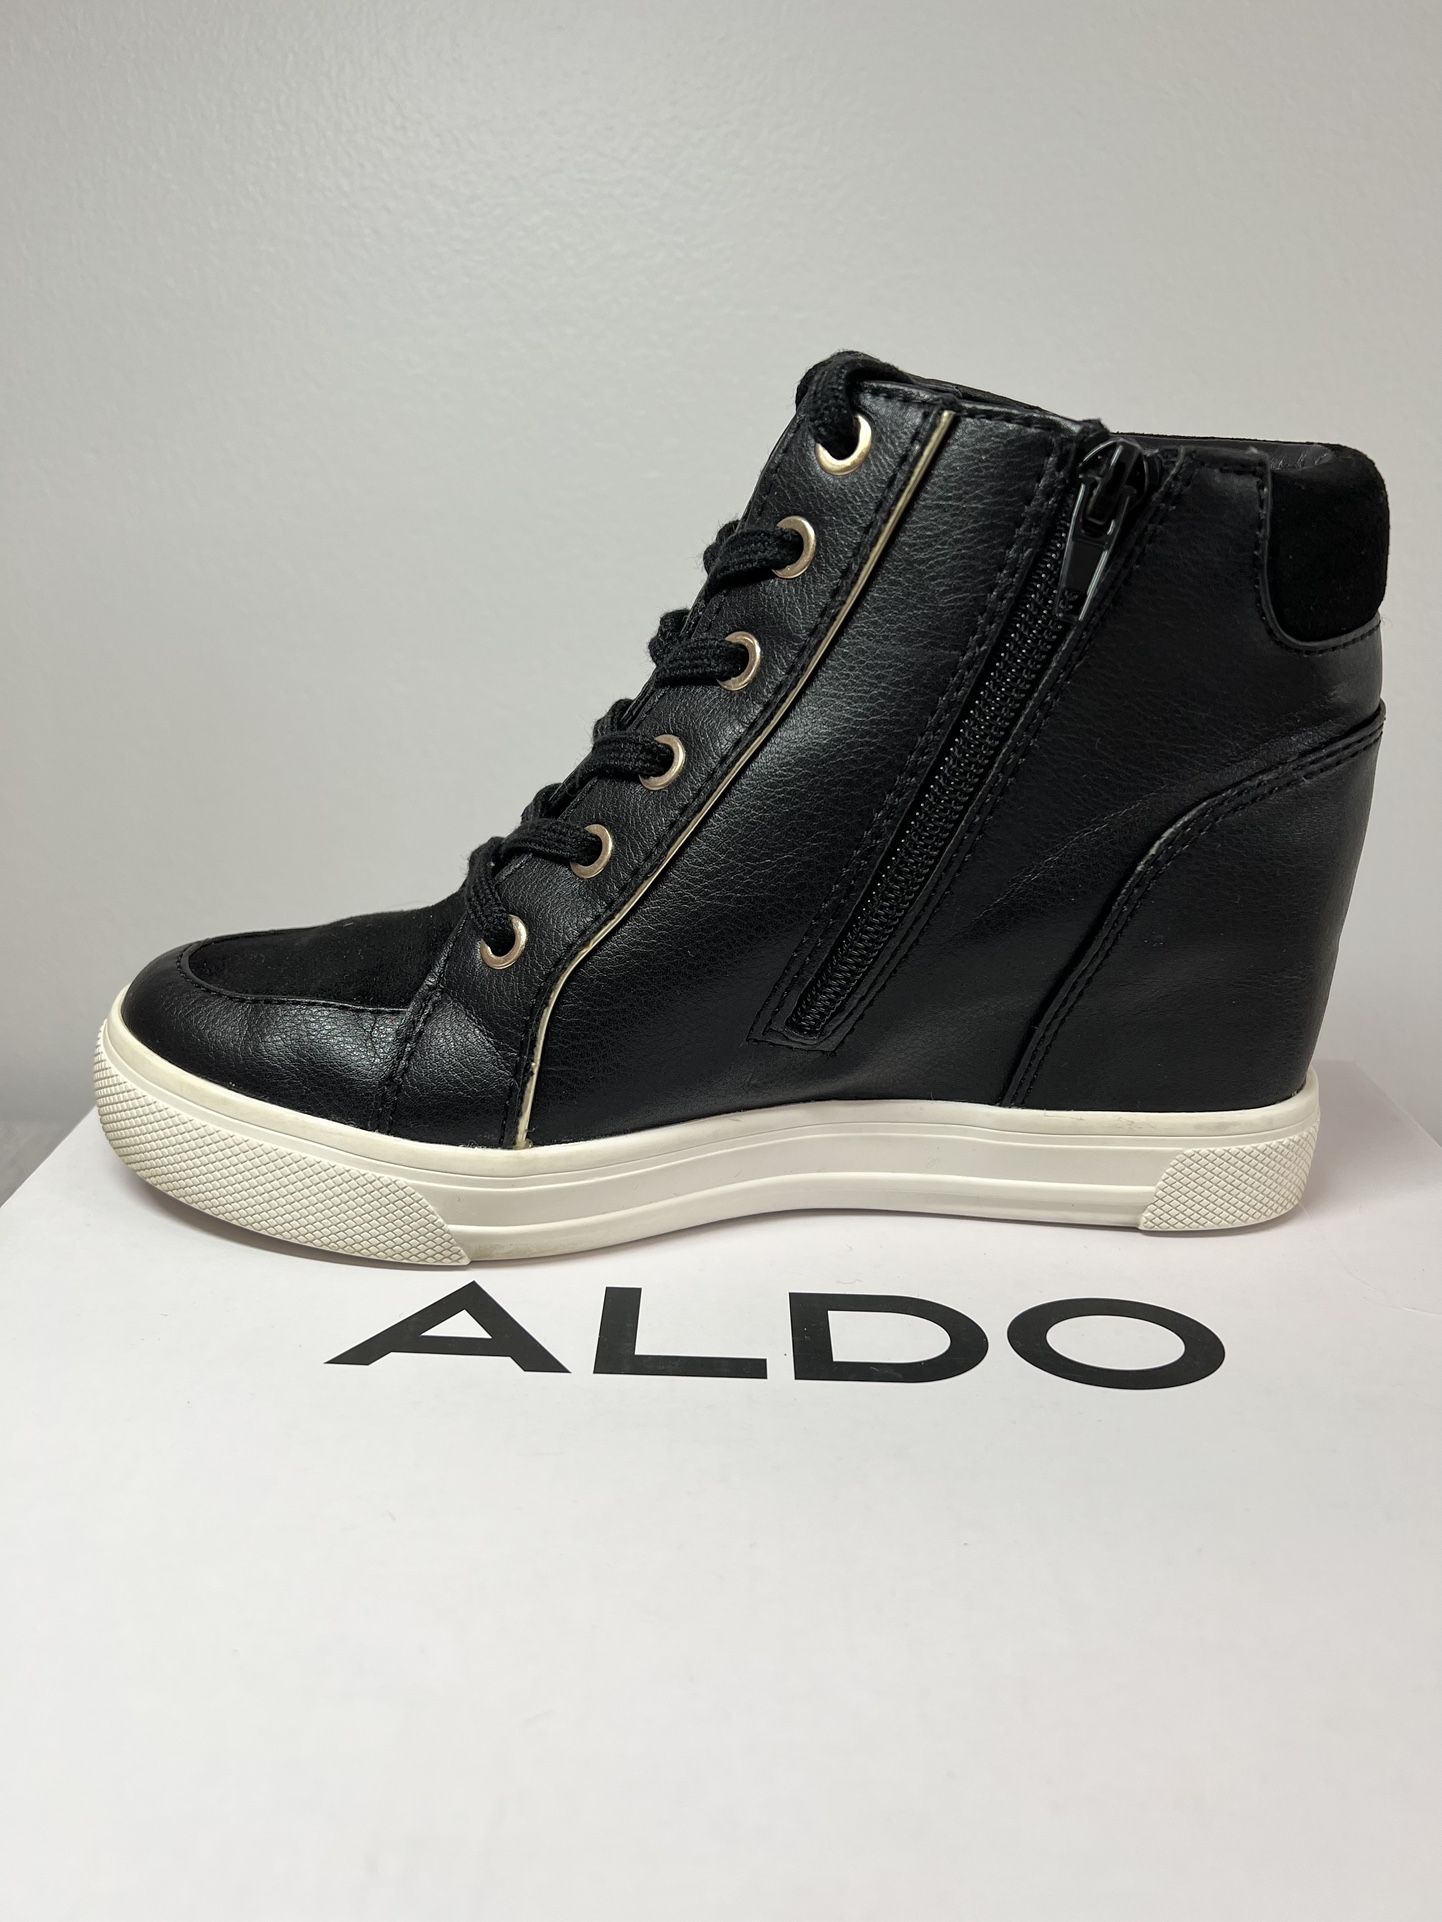 NEW Aldo High Heals Zip Up Booties All Leather Size 6.5. Very Little Usage. Like New